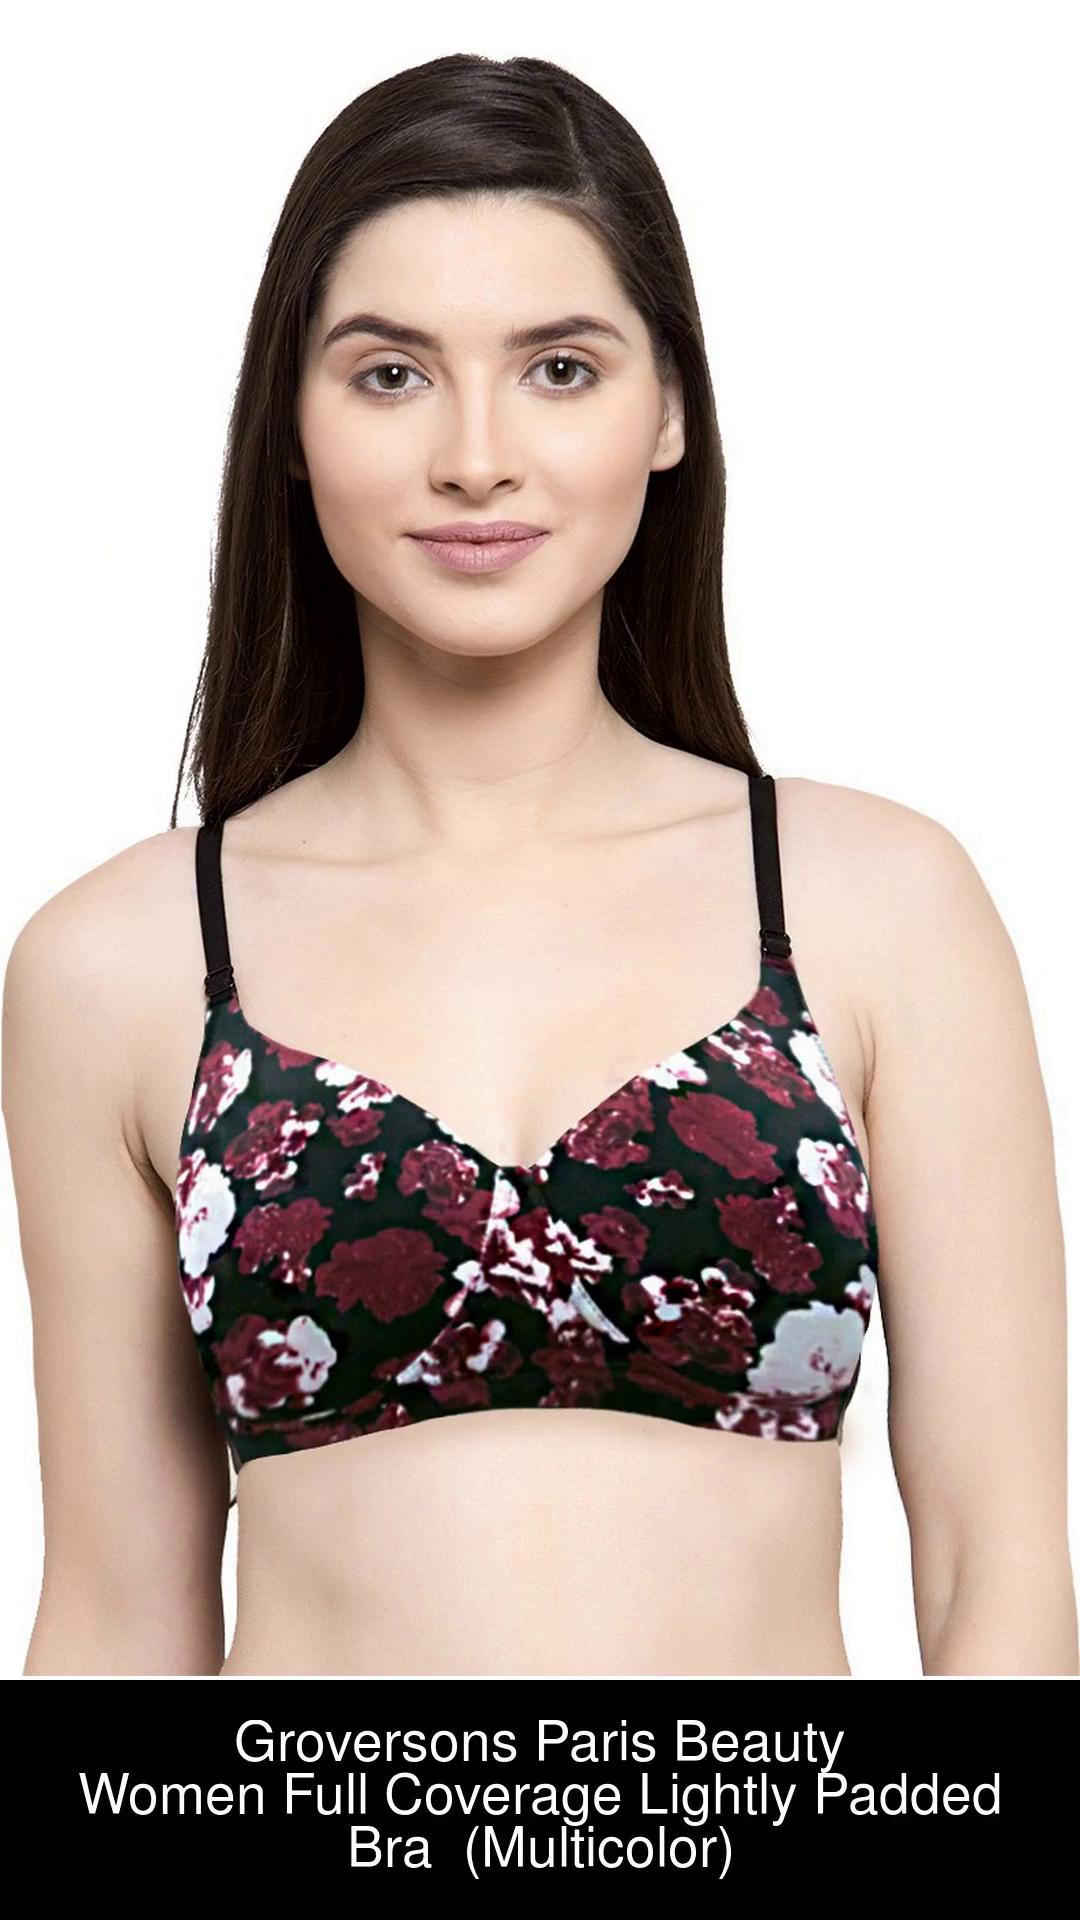 Groversons Paris Beauty Light padded wirefree T-shirt bra in big floral  print Women Full Coverage Lightly Padded Bra - Buy Groversons Paris Beauty  Light padded wirefree T-shirt bra in big floral print